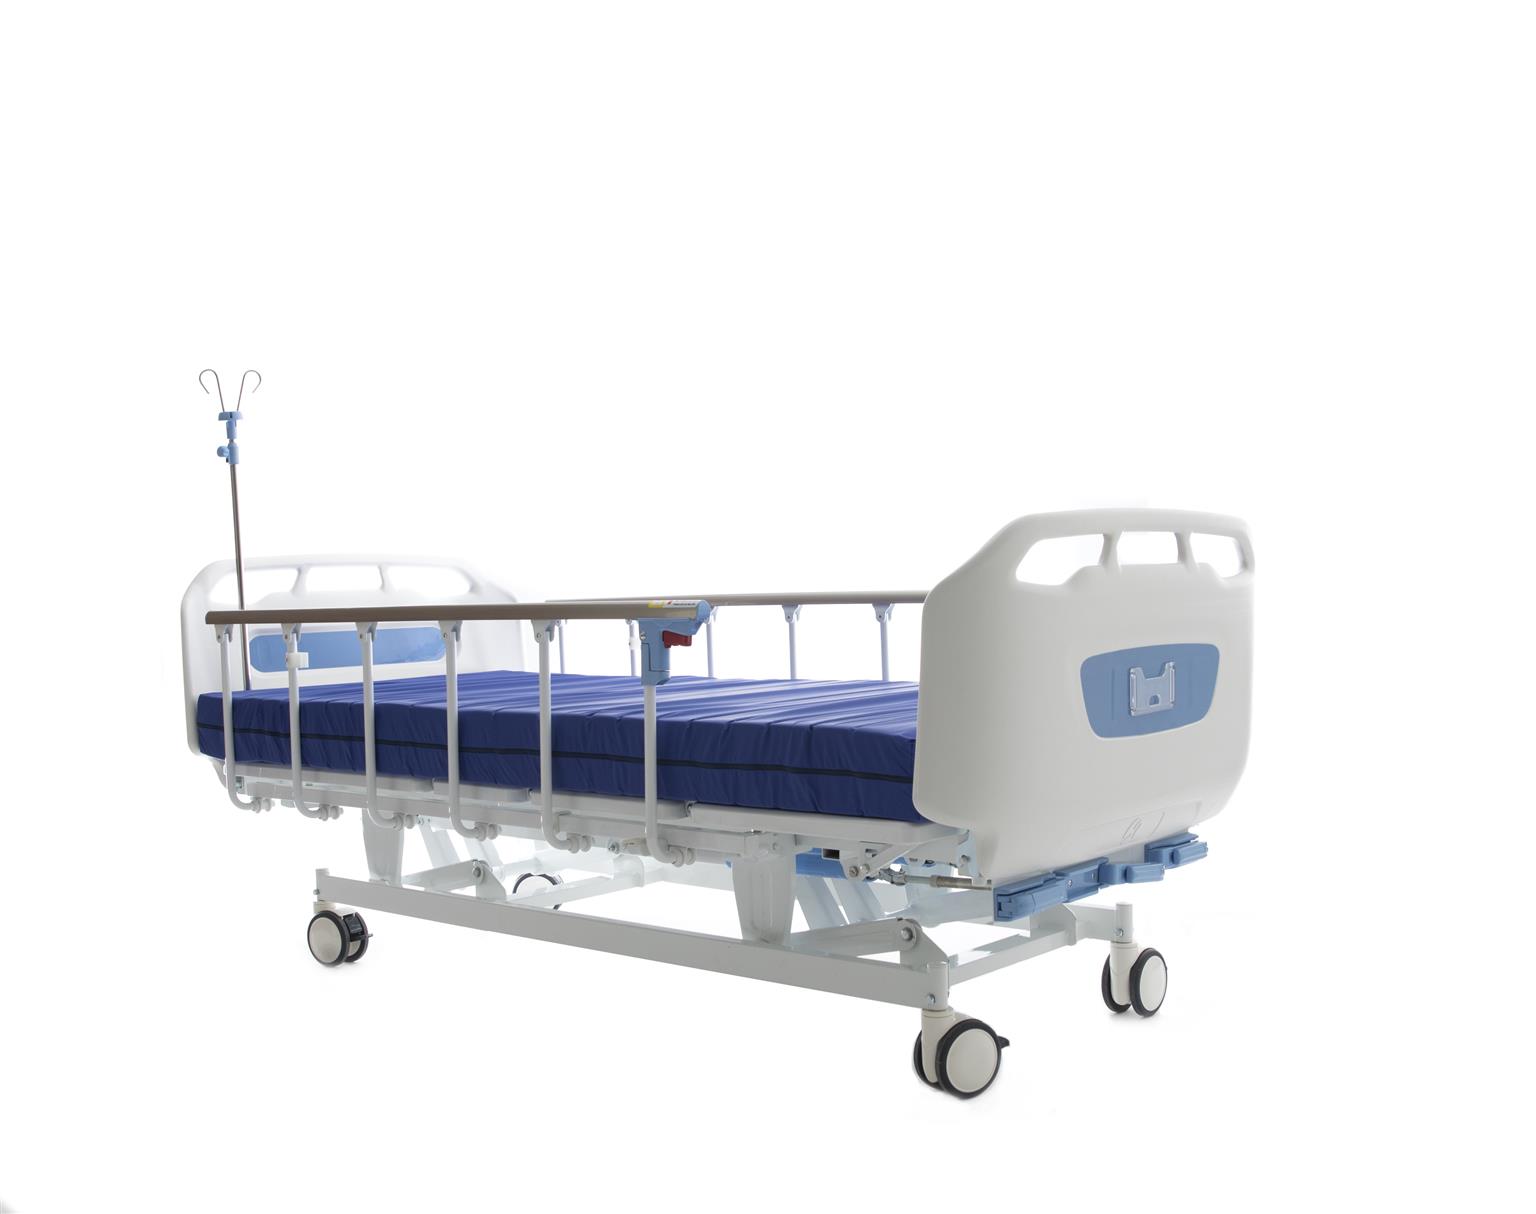 3 Crank Hospital Bed - On Sale, FREE DELIVERY. While Stocks Last.